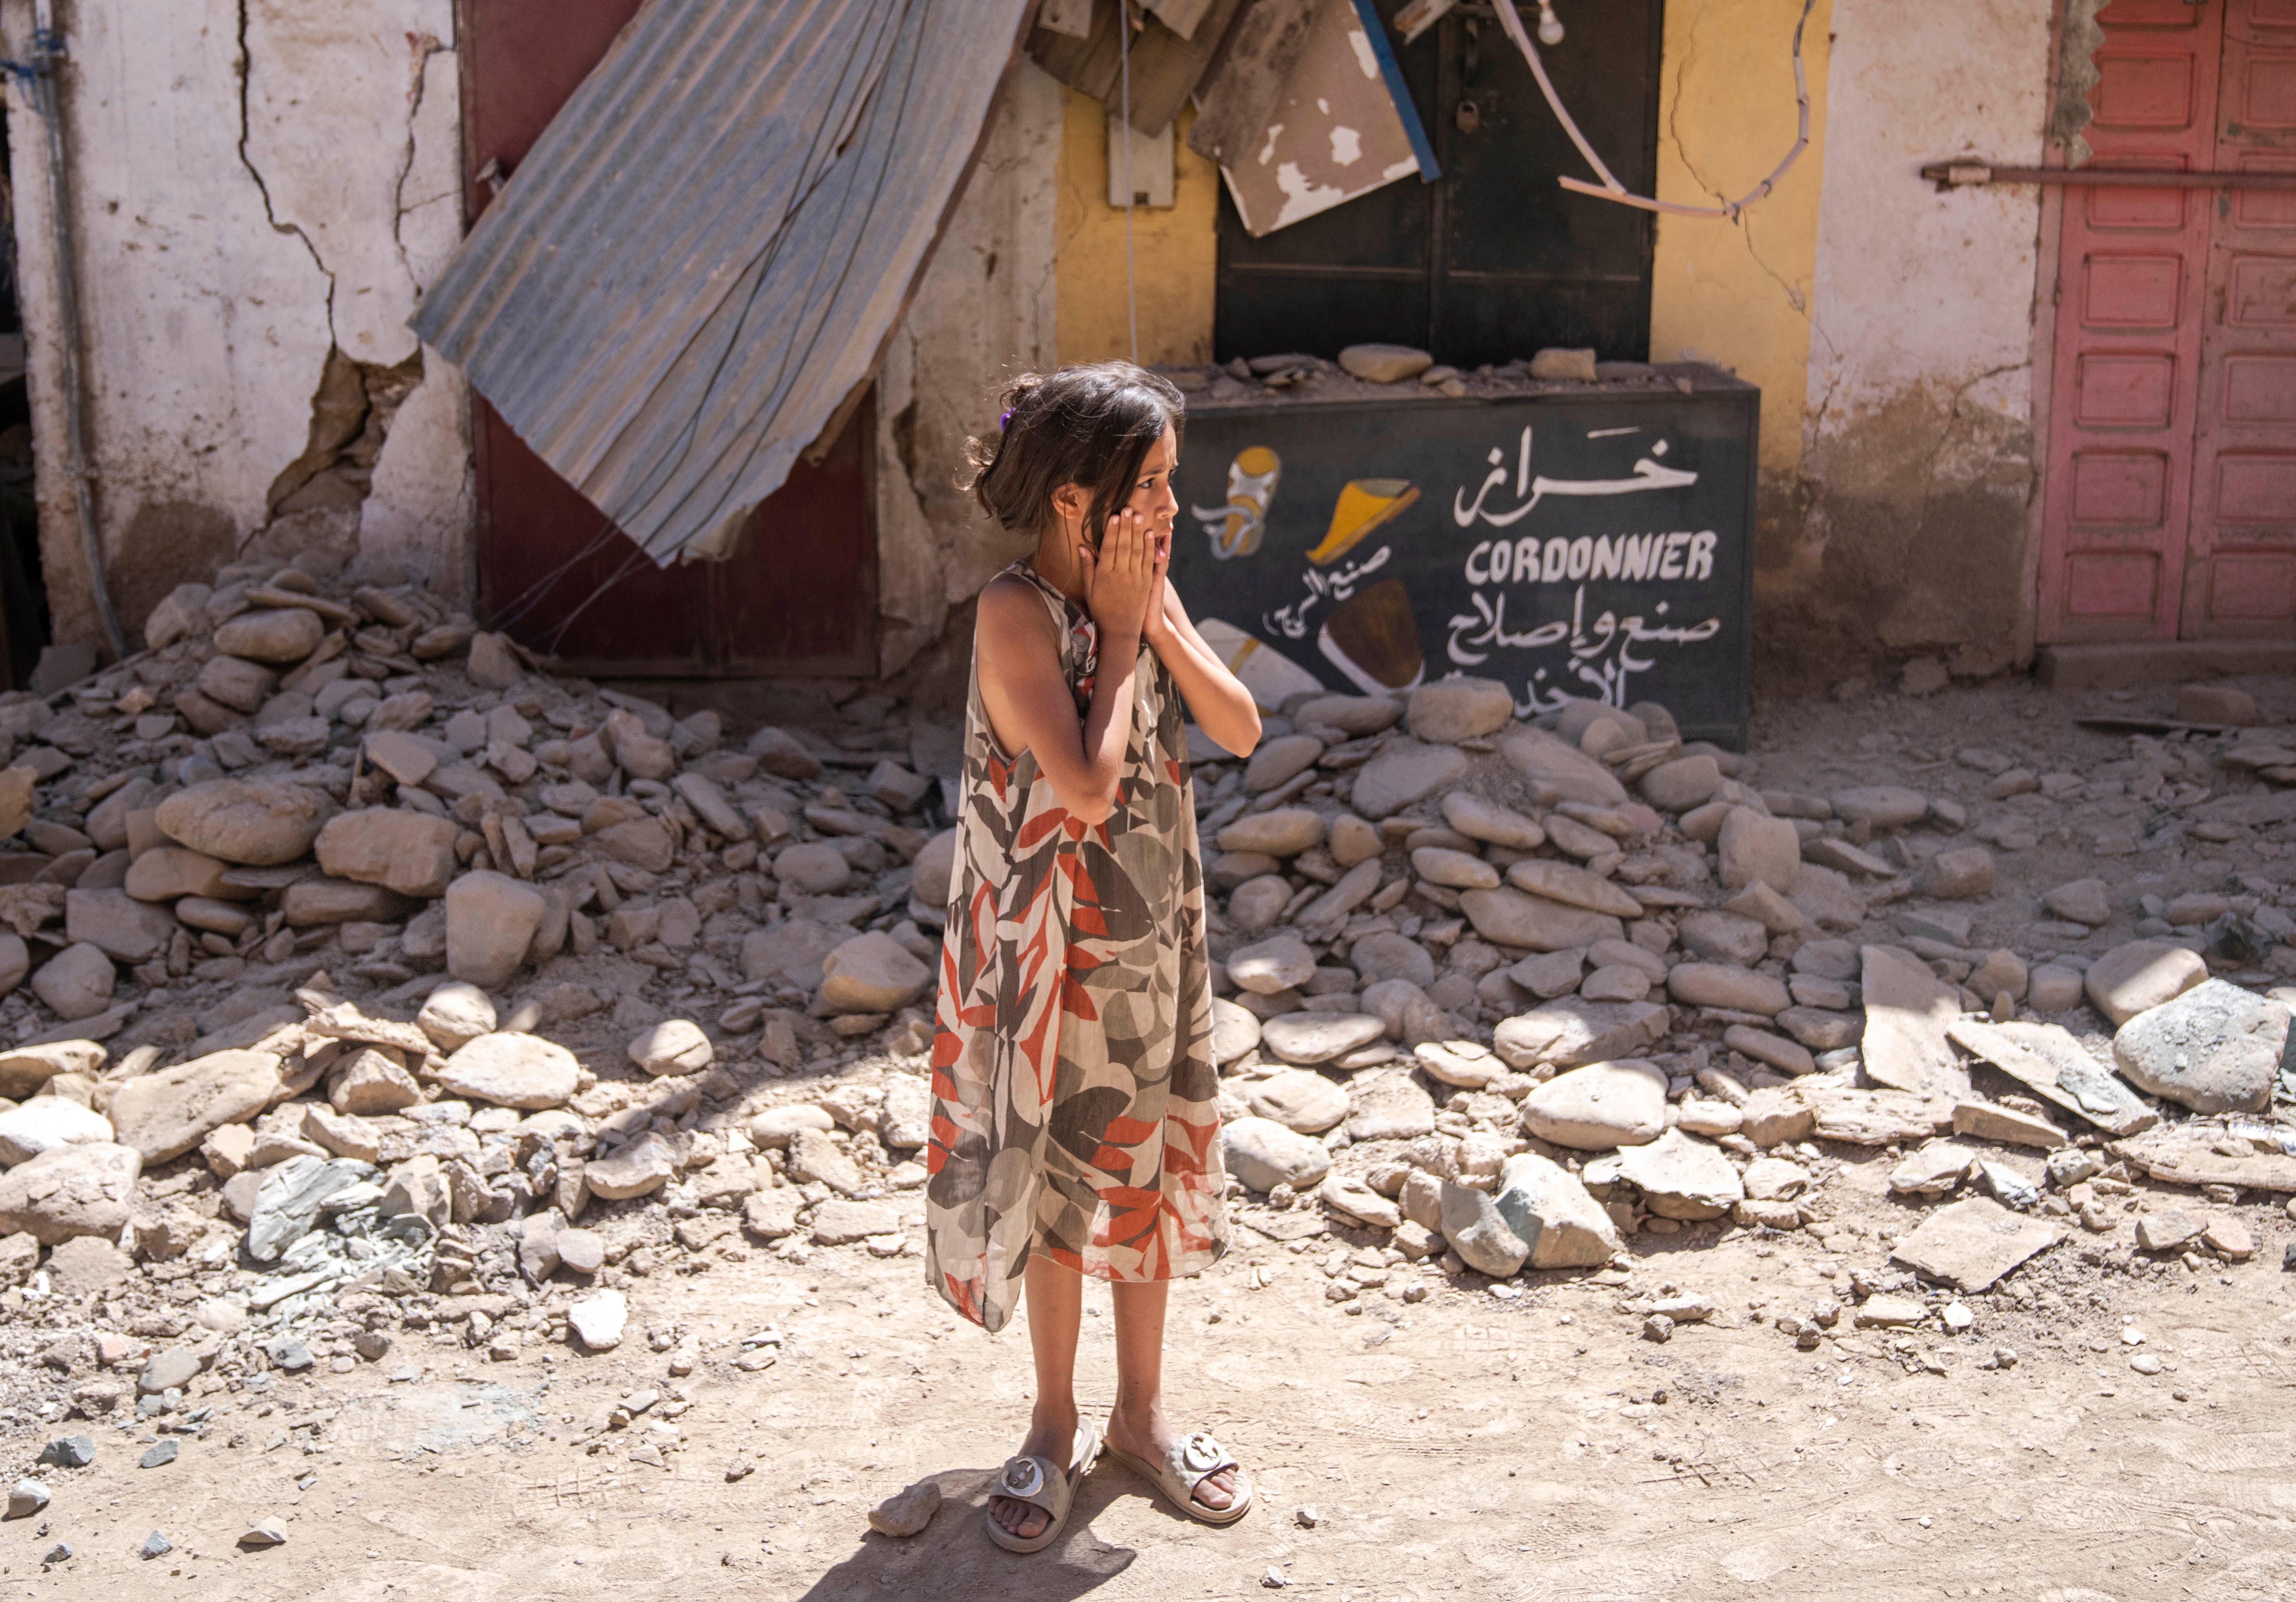 File photo: A child reacts after inspecting the damage caused by the earthquake, in her town of Amizmiz, near Marrakech